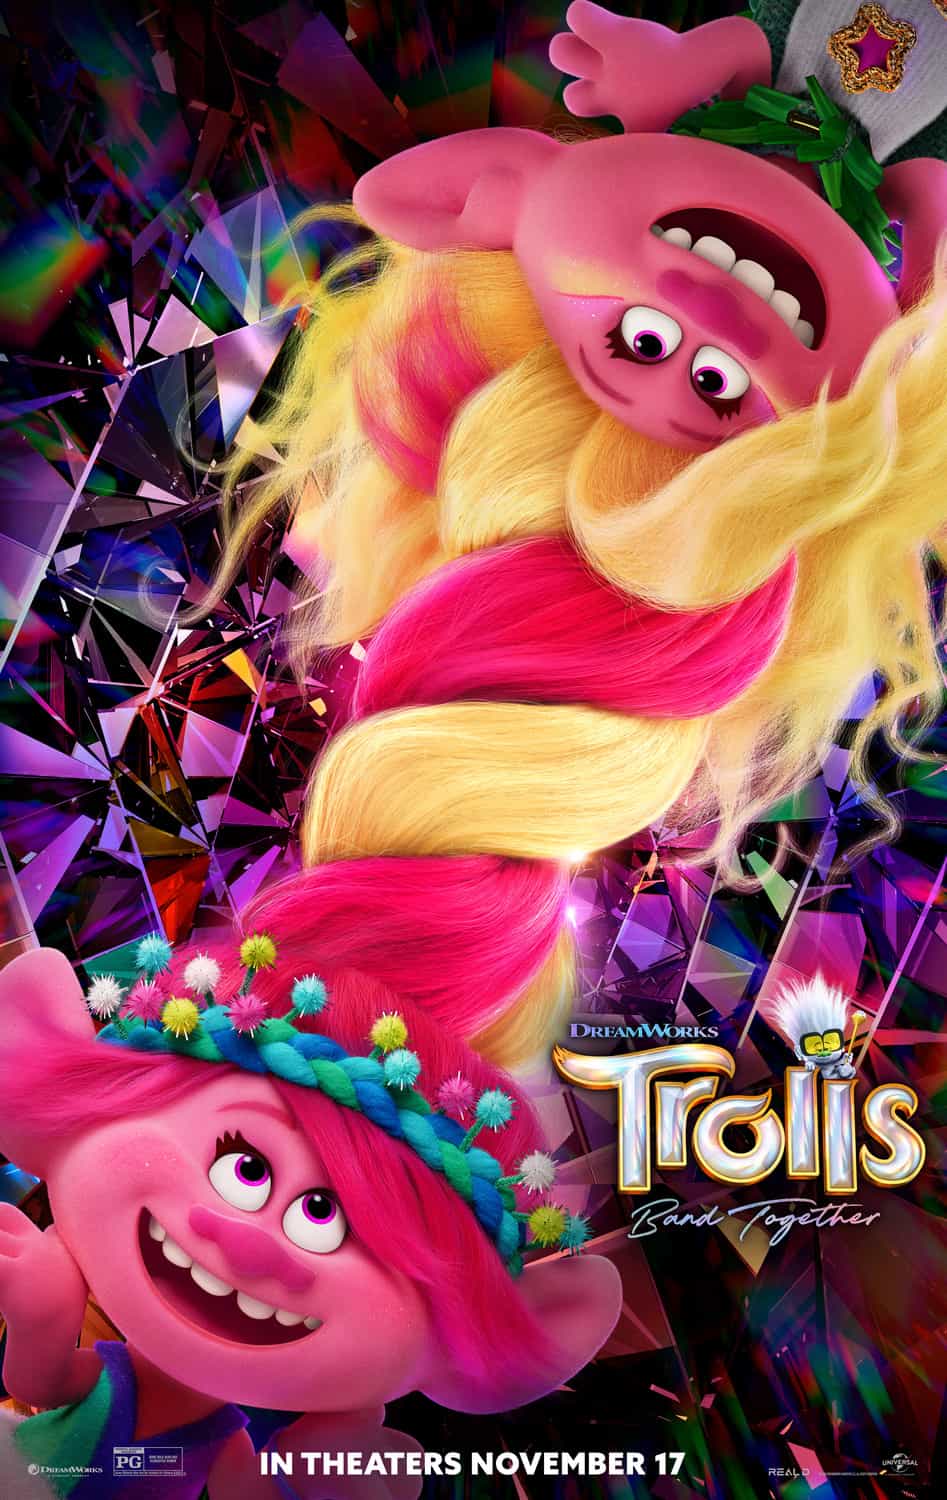 New poster has been released for Trolls Band Together which stars Anna Kendrick and Justin Timberlake - movie UK release date 20th October 2023 #trollsbandtogether